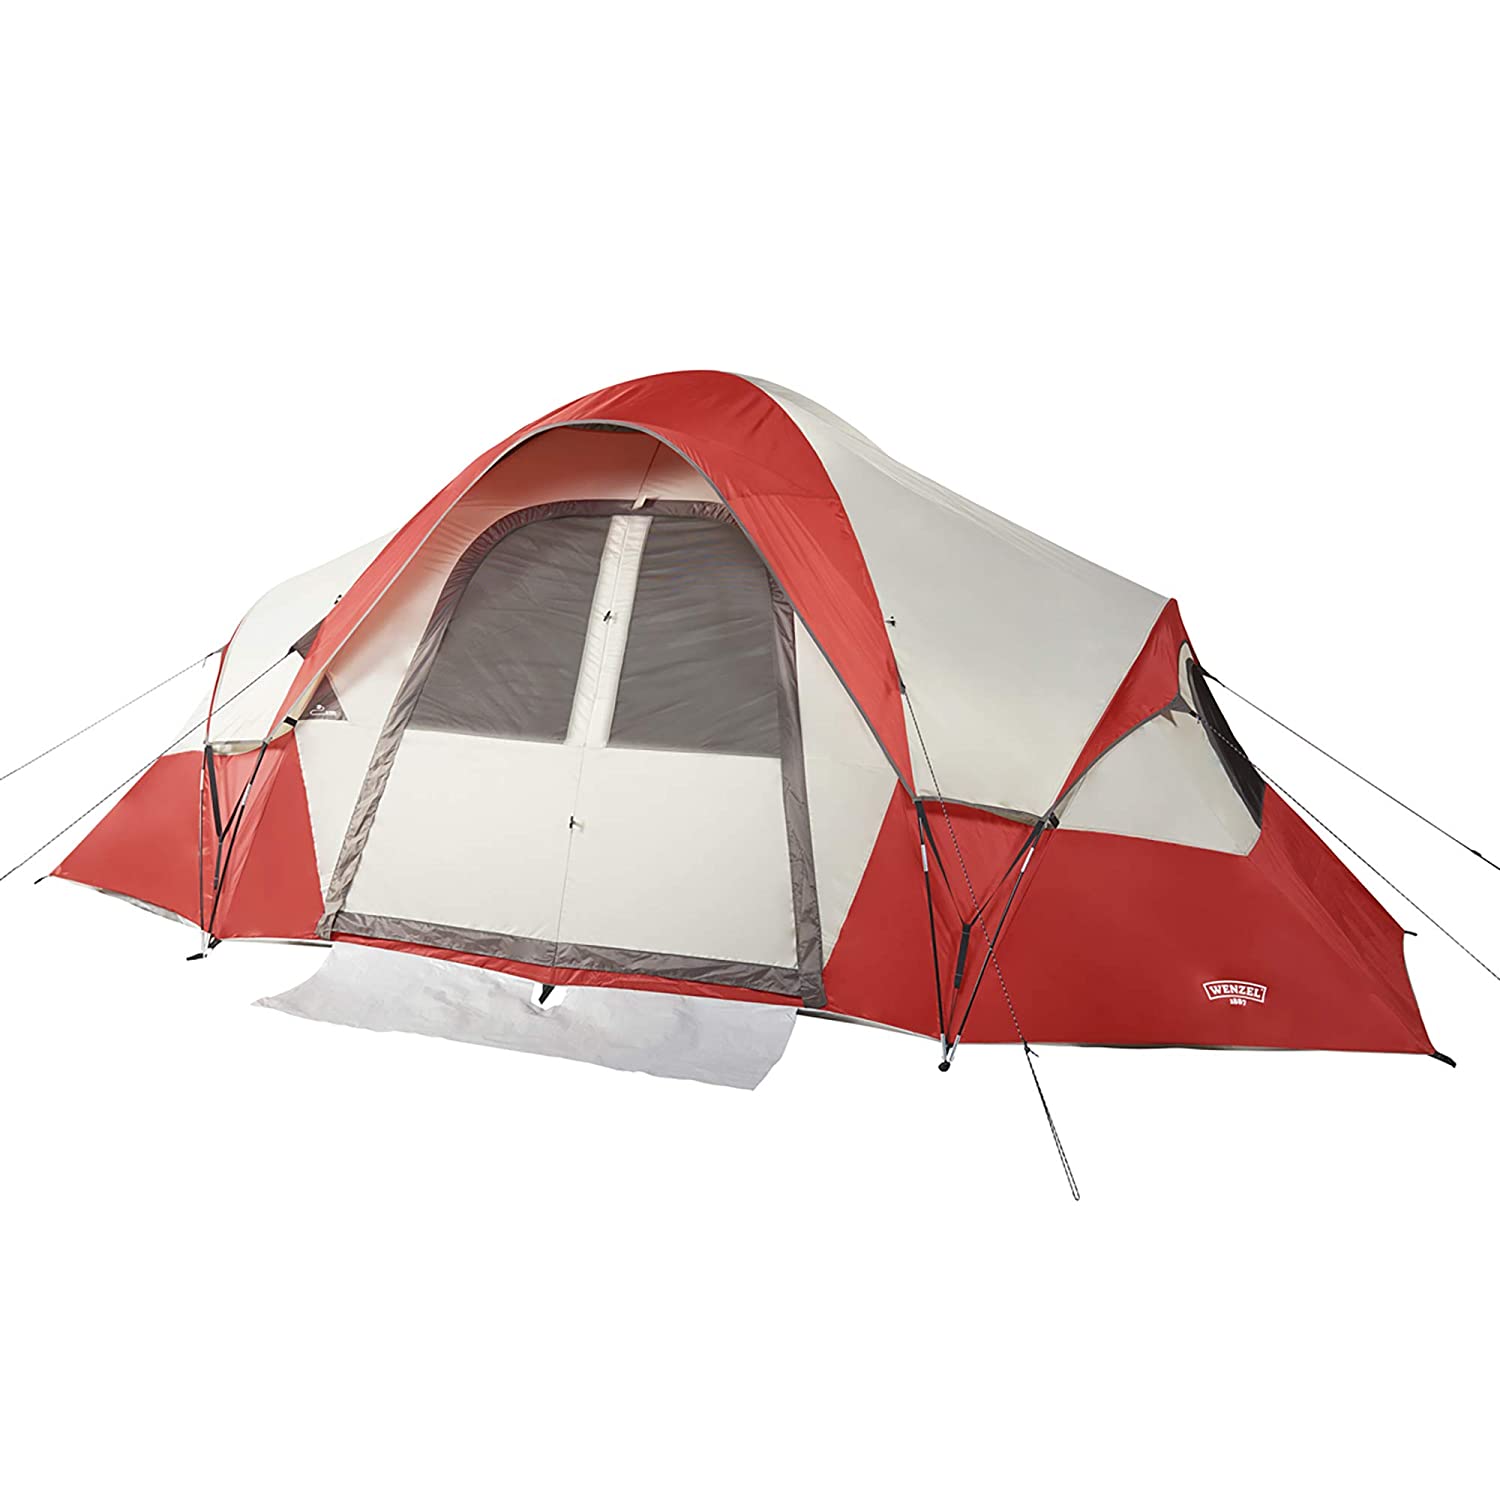 teepee tent - Wenzel Outdoors Shenanigan 5 Person Tent